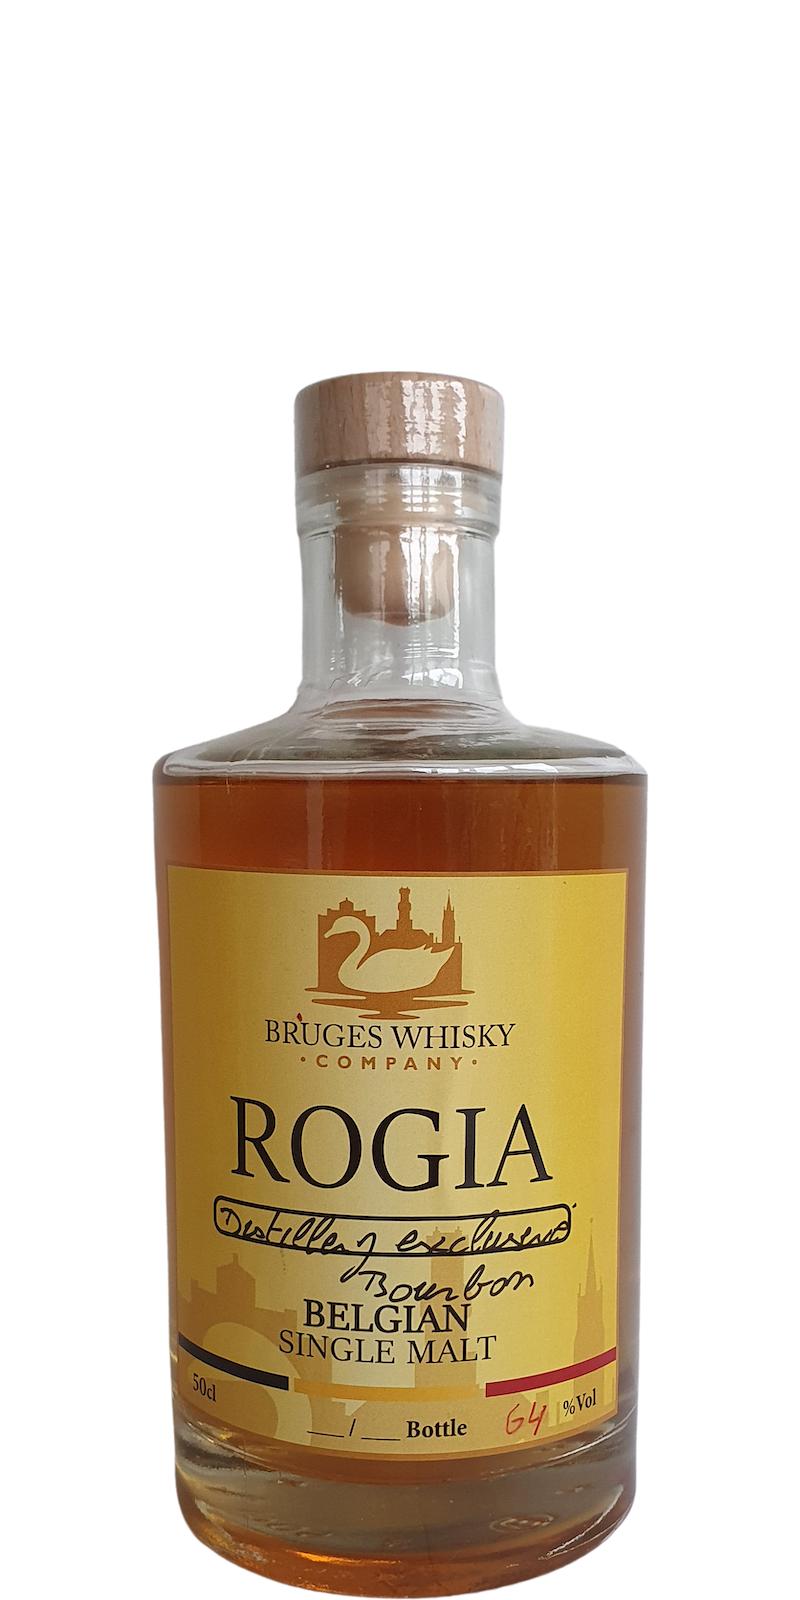 Bruges Whisky Company Rogia